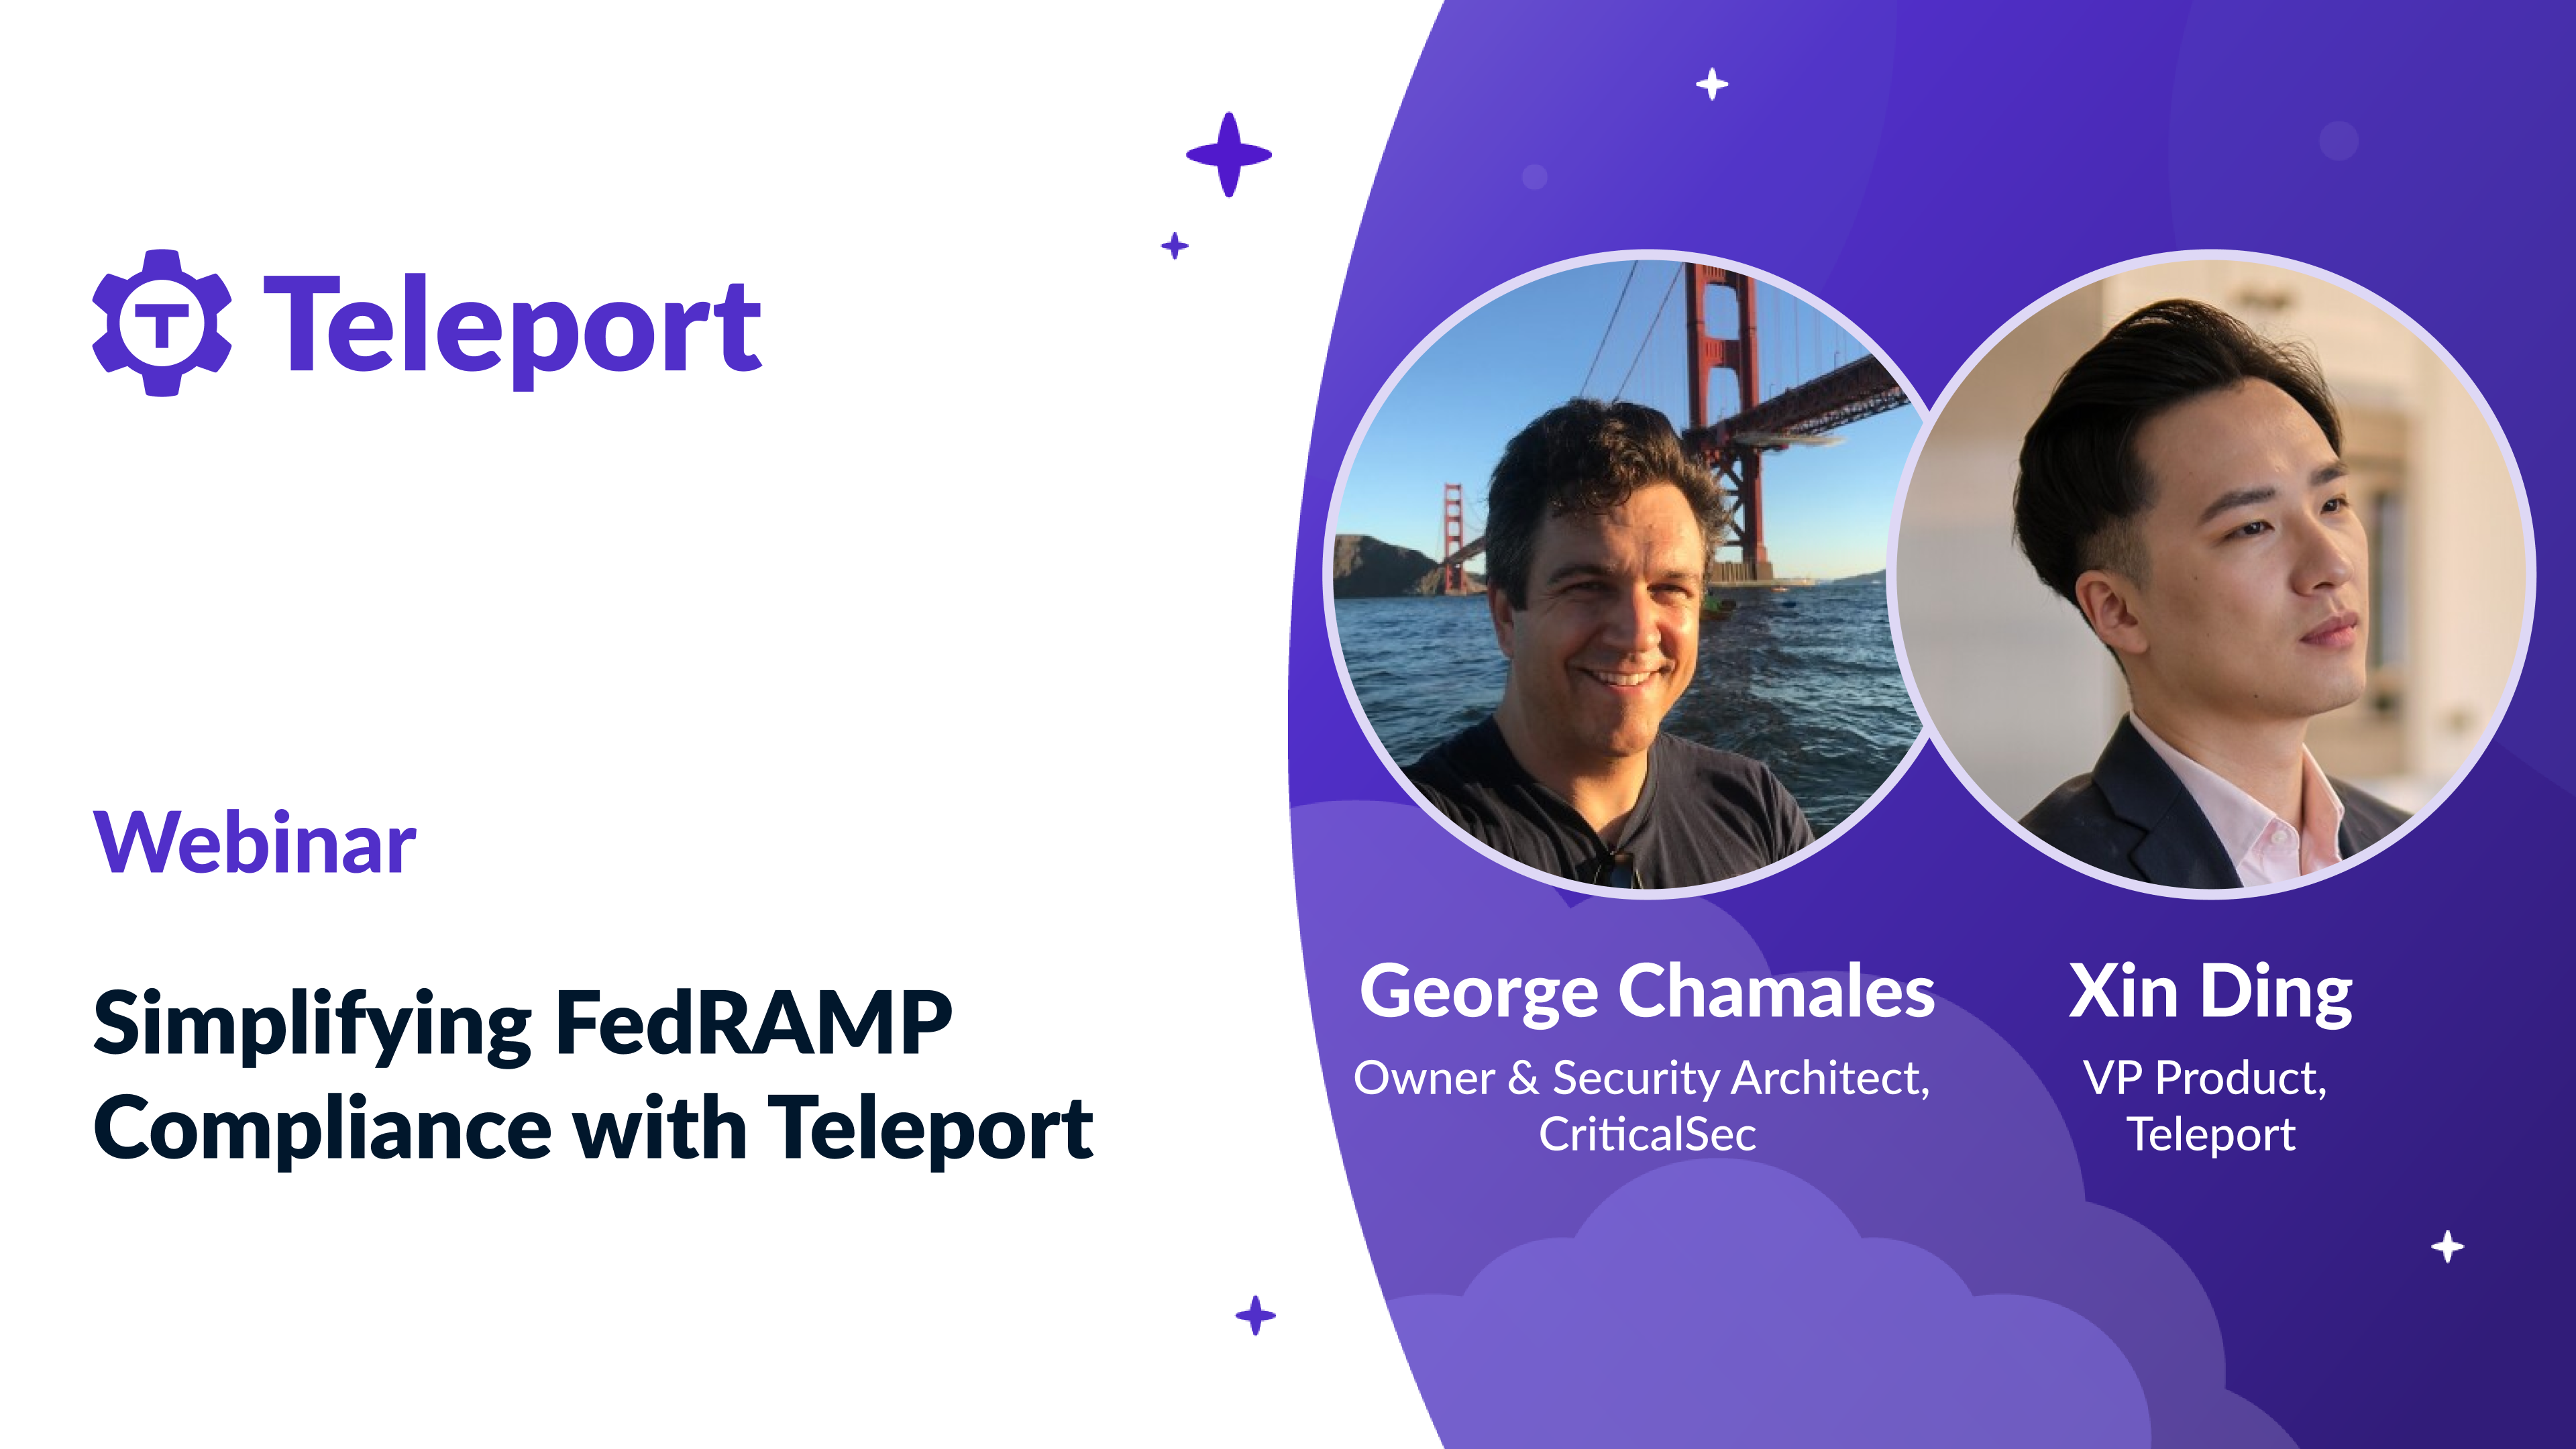 Simplifying FedRAMP Compliance with Teleport